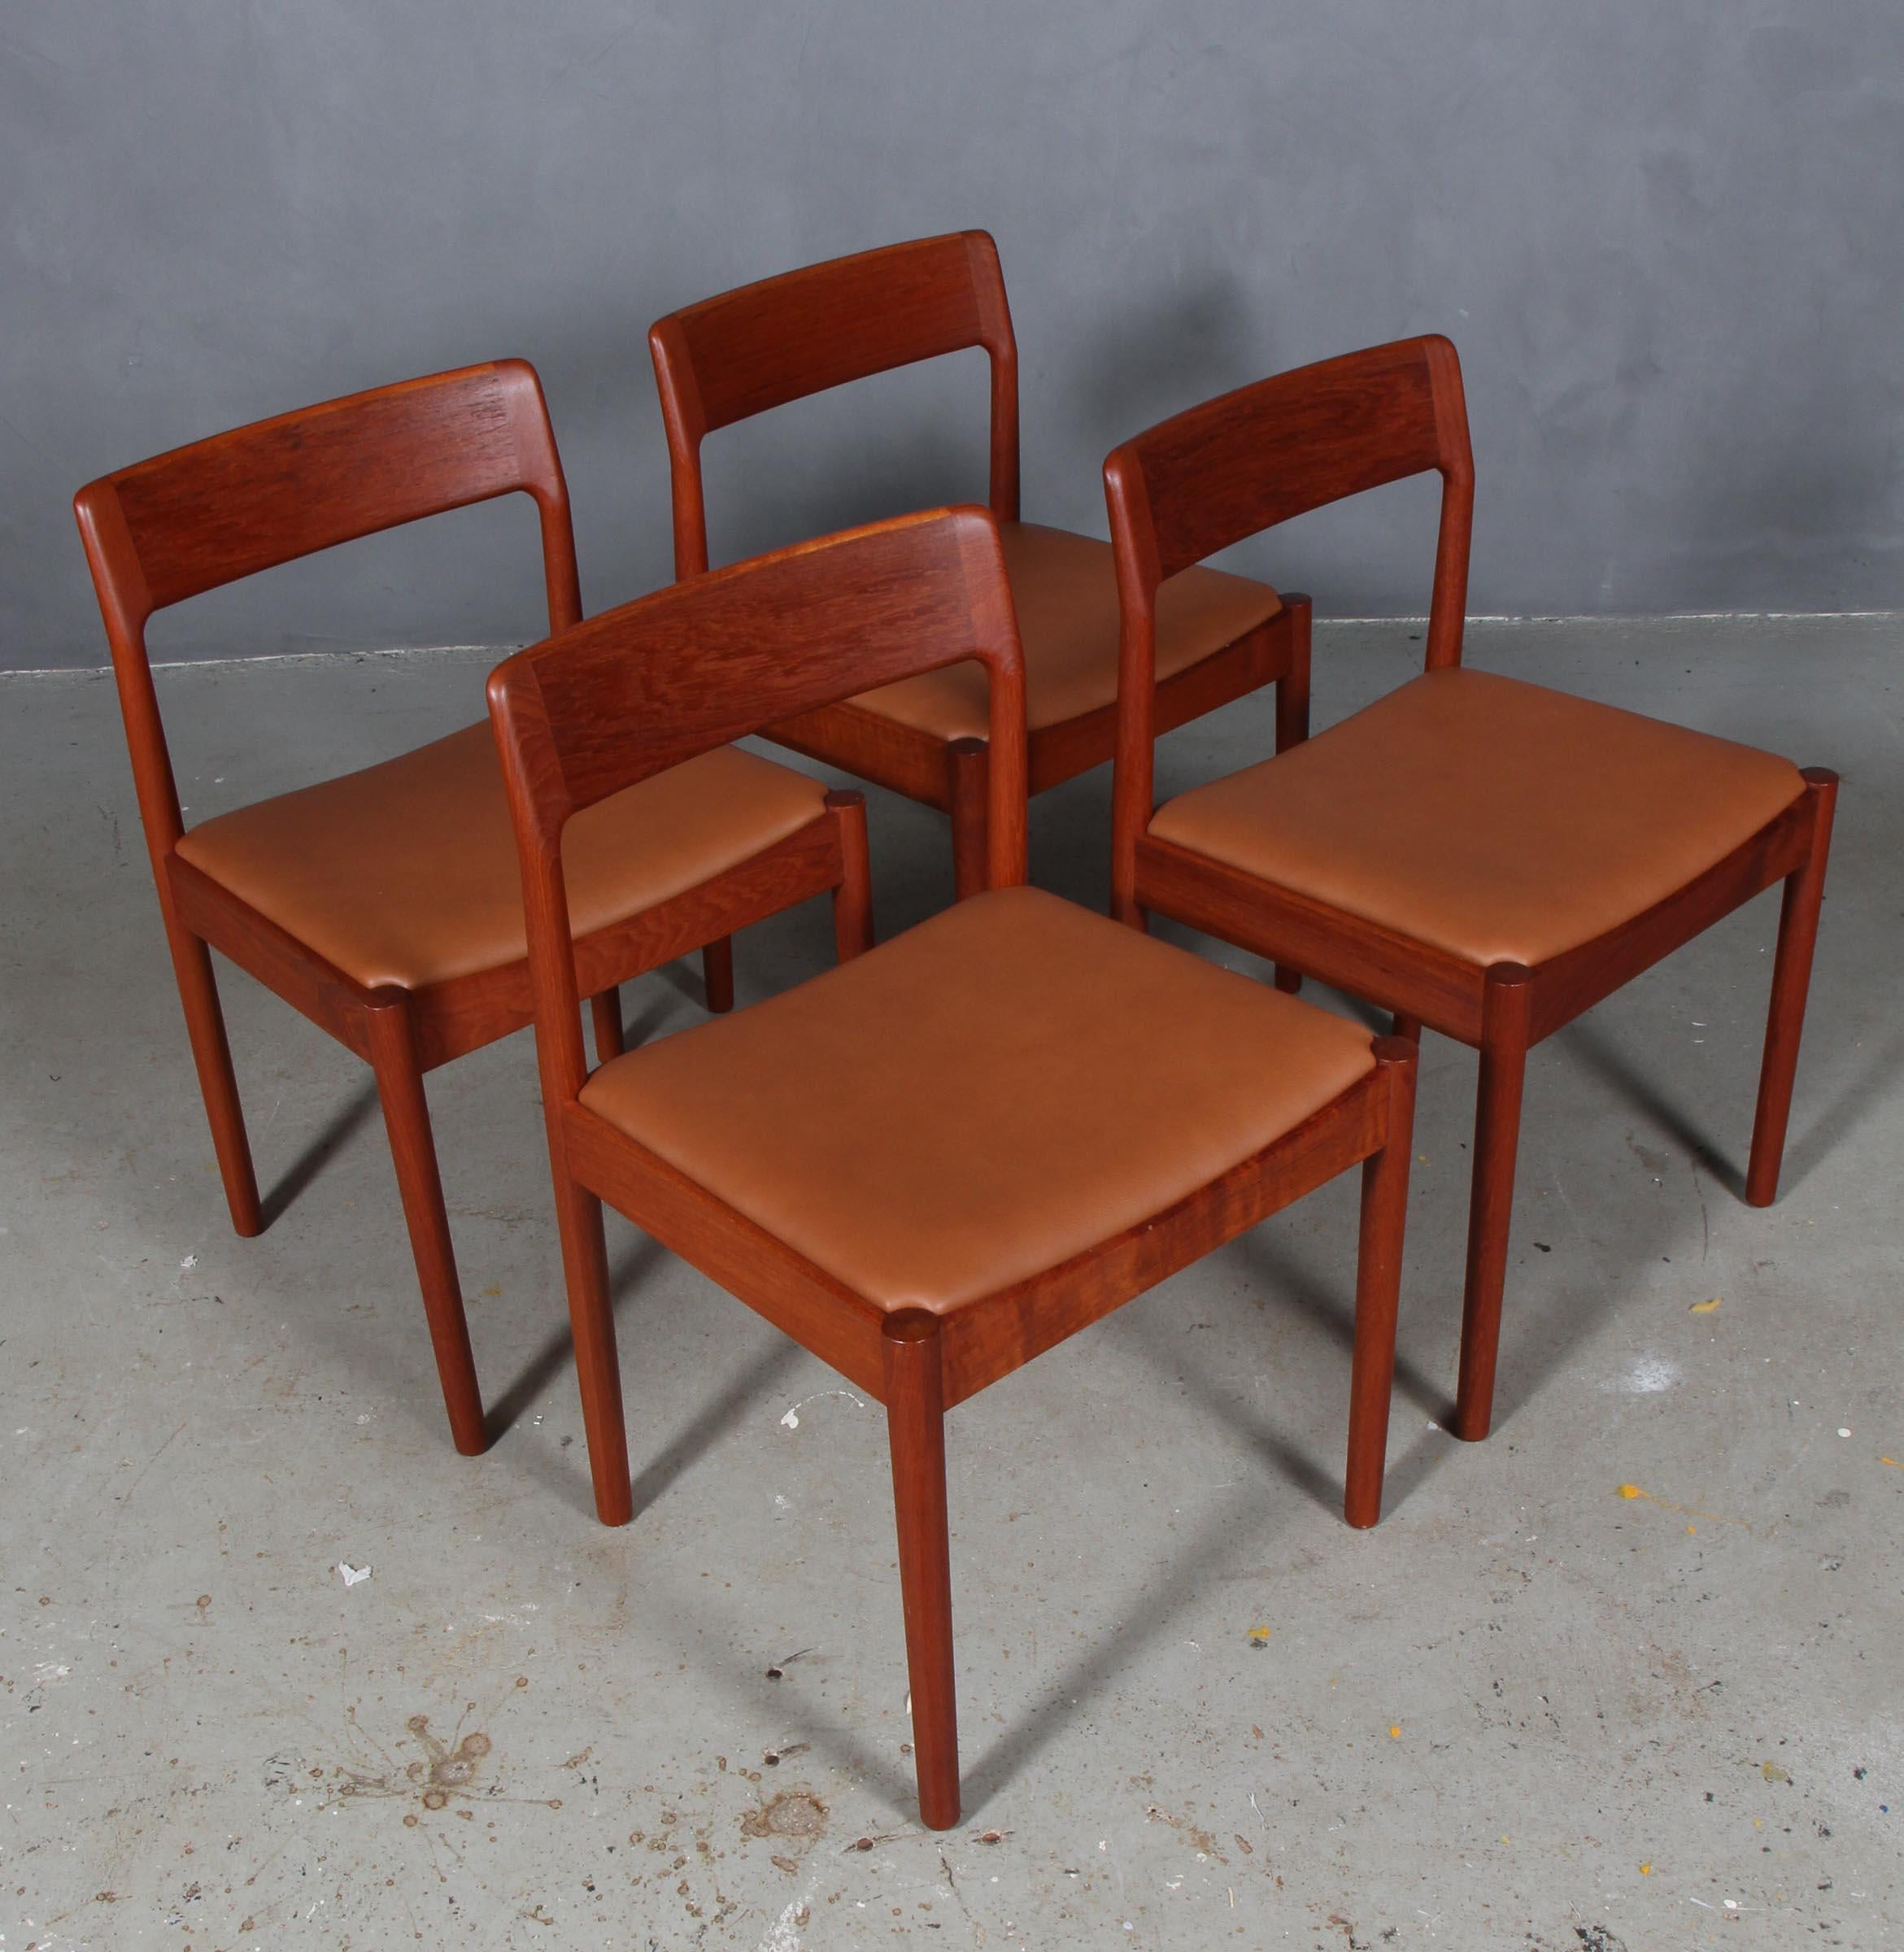 Johannes Nørgaard set of four chairs in teak

New upholstered with tan aniline leather.

Made by Nørgaards møbelfabrik 1960s.